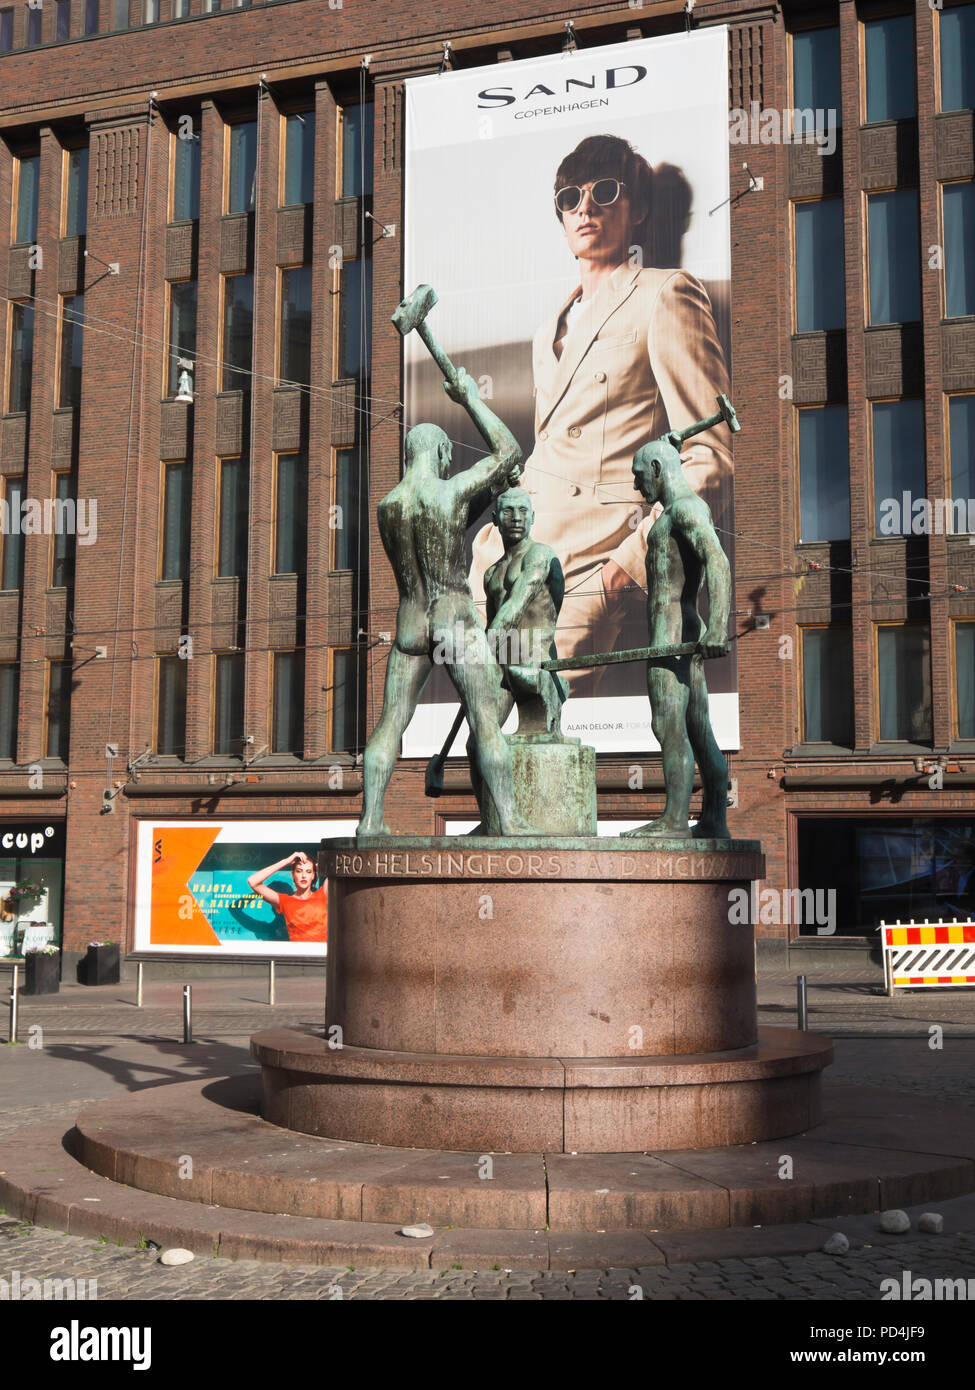 Opposing lifestyles in the centre of Helsinki Finland, sculpture of industrial ironworkers in bronze set against a gigant board promoting Sand brand Stock Photo